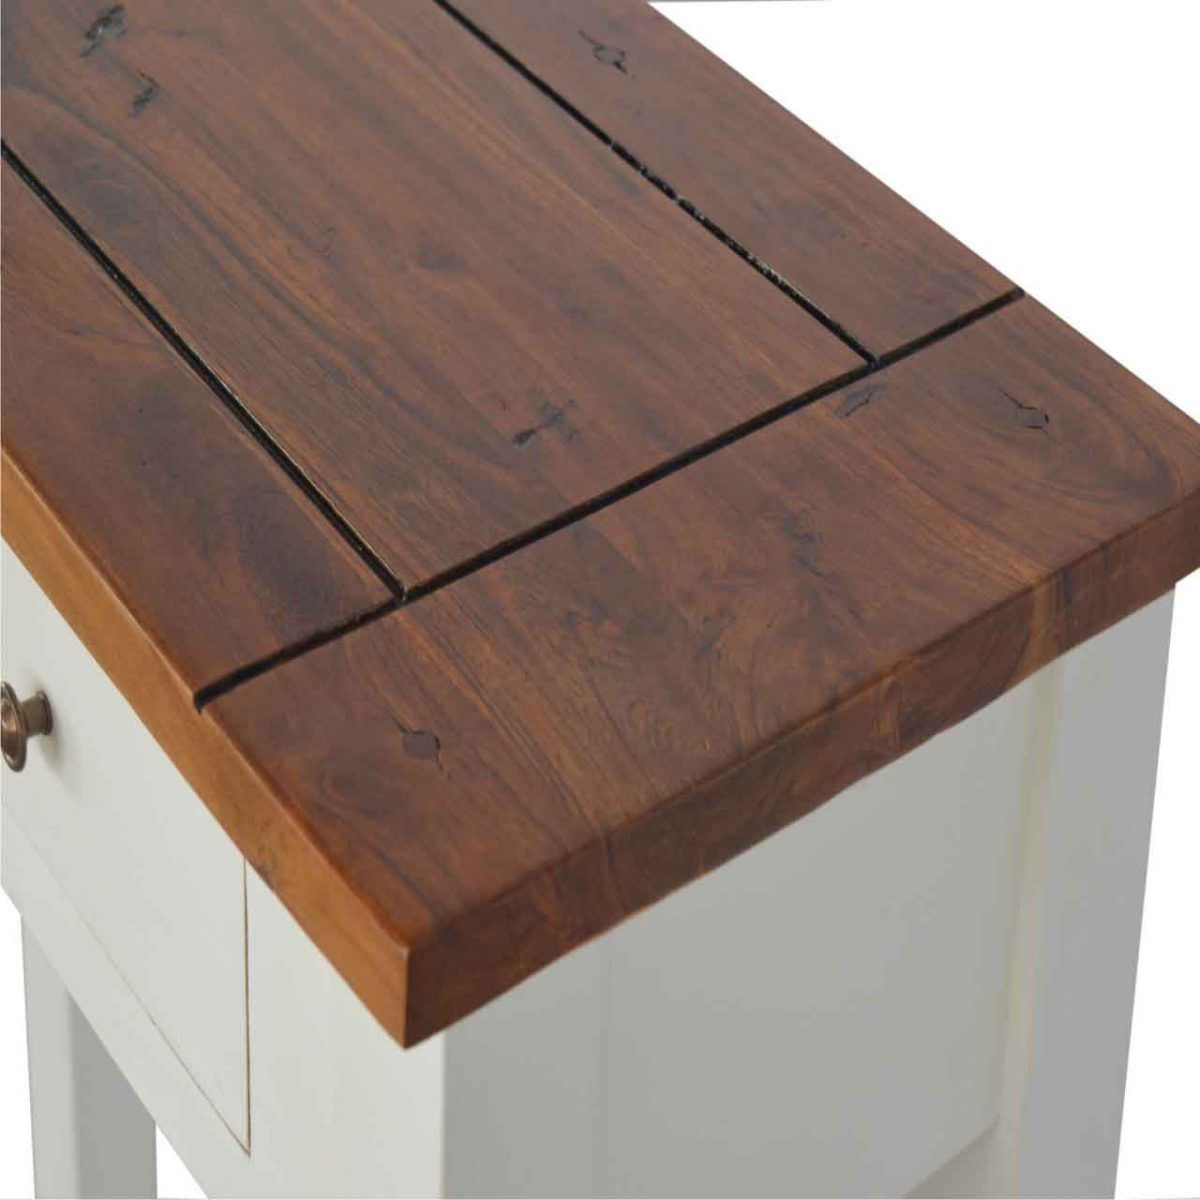 Solid Mango & Acacia Wood 2 Tone 2 Drawer Narrow Console Throughout Natural Mango Wood Console Tables (View 11 of 20)